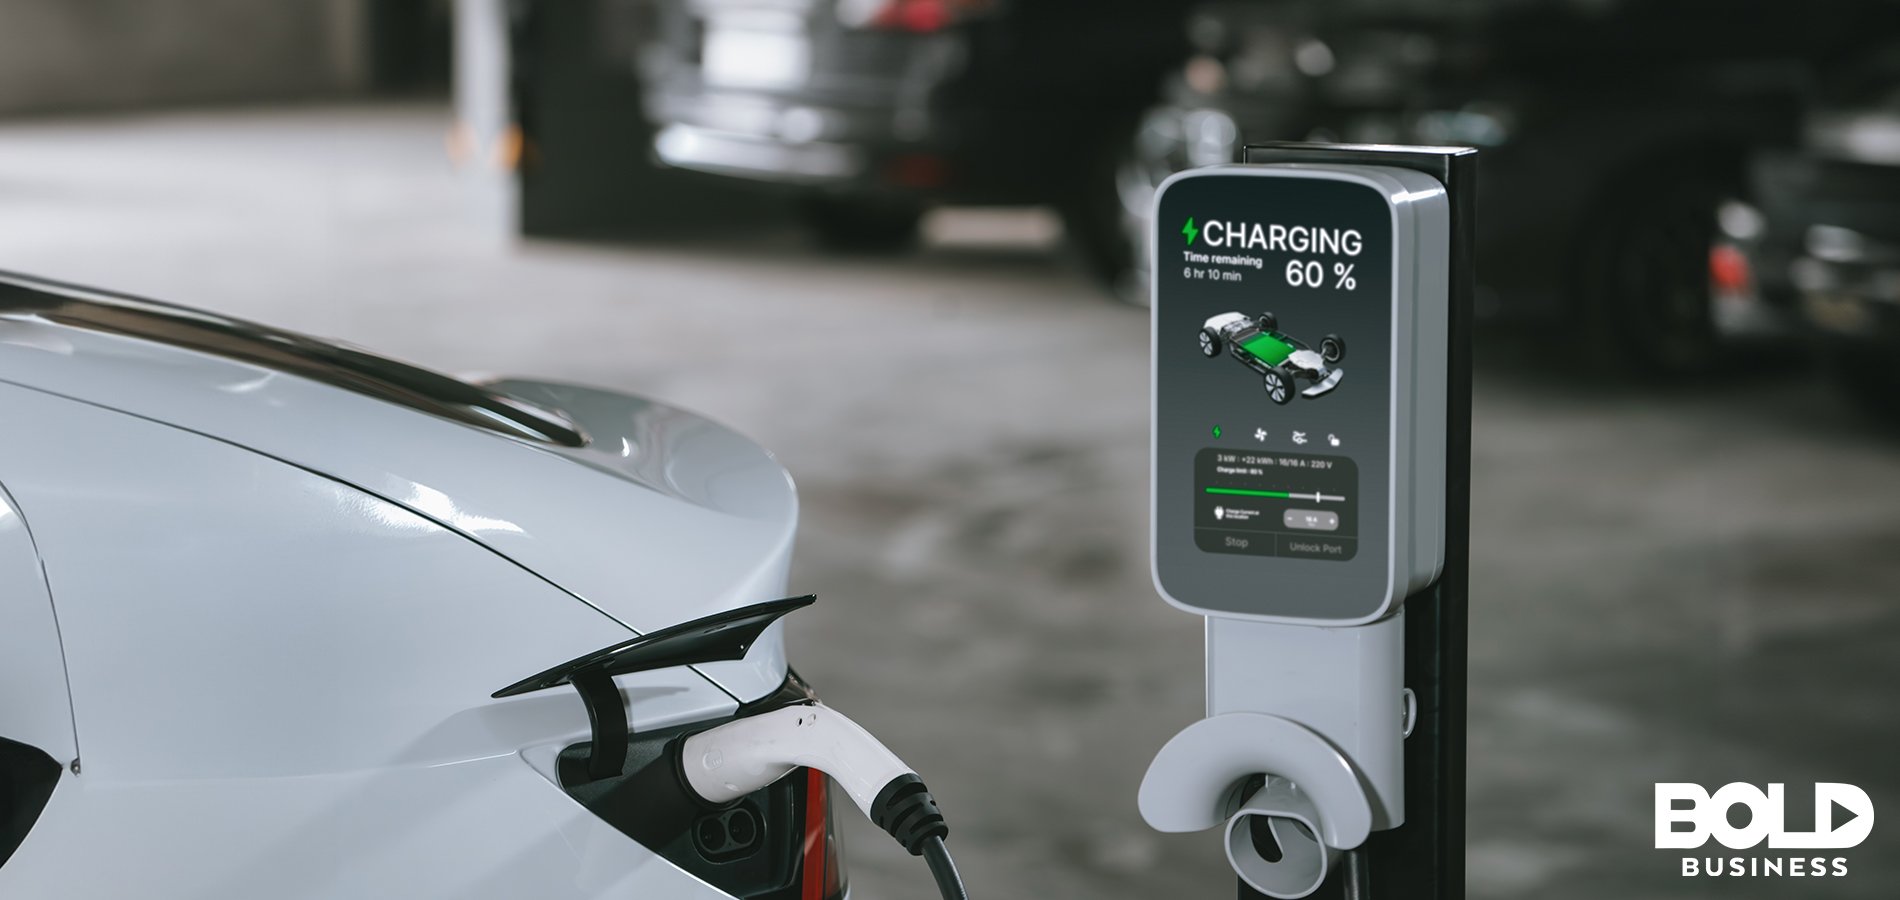 Electric vehicle market challenges include charging